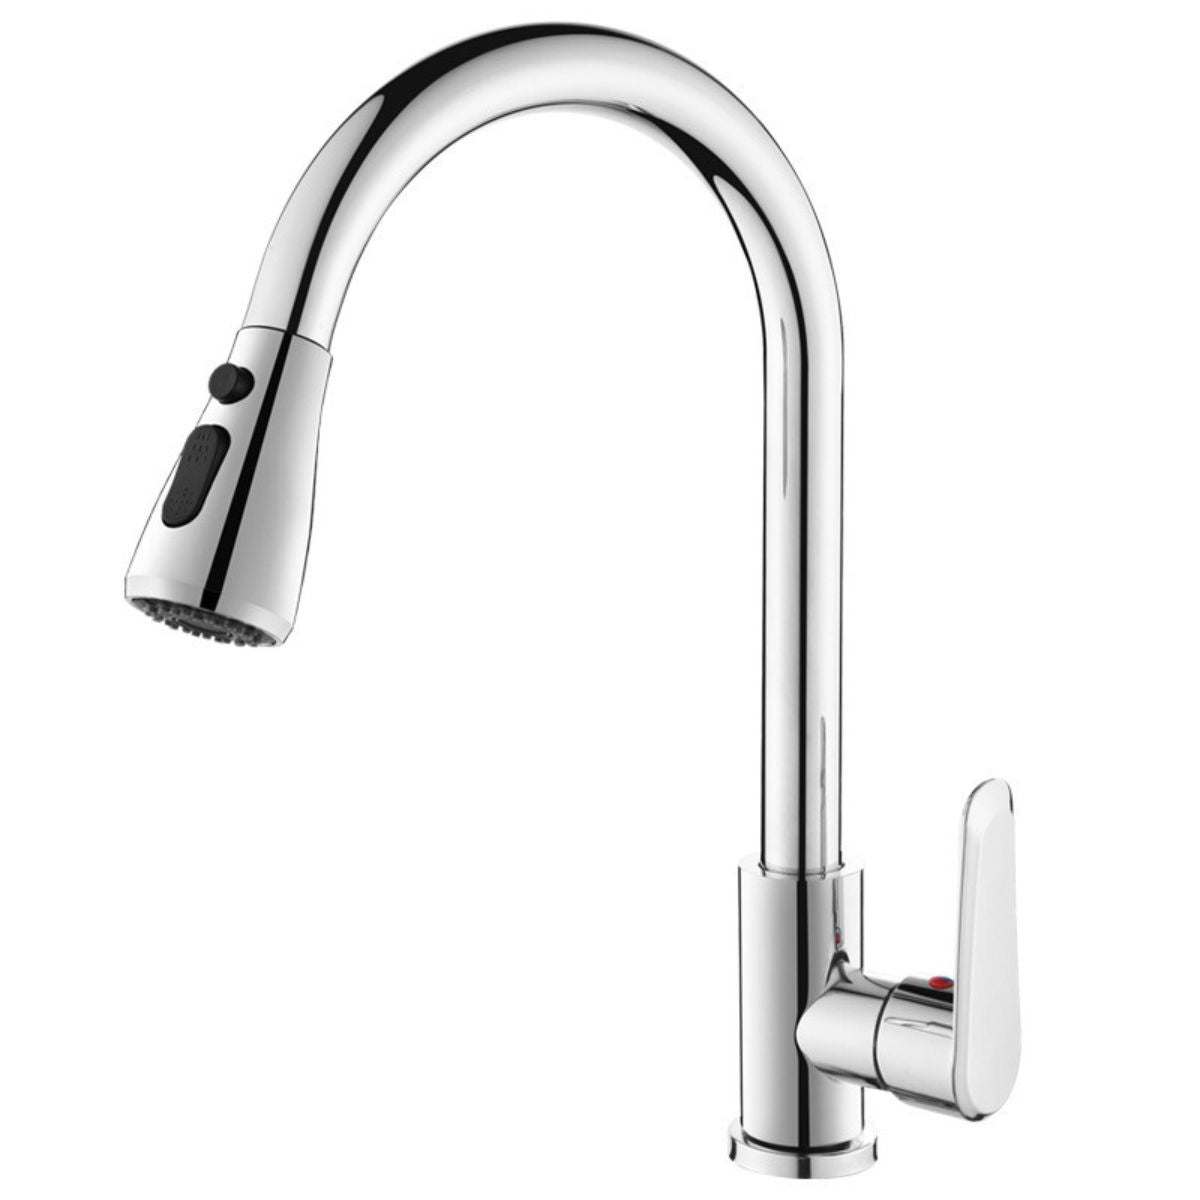 TovaHaus Kitchen Sink Taps Mixer with Pull Out Spray, Swivel Single Handle Pull Down Stainless Steel Kitchen Faucet for UK Standard Fittings - TovaHaus